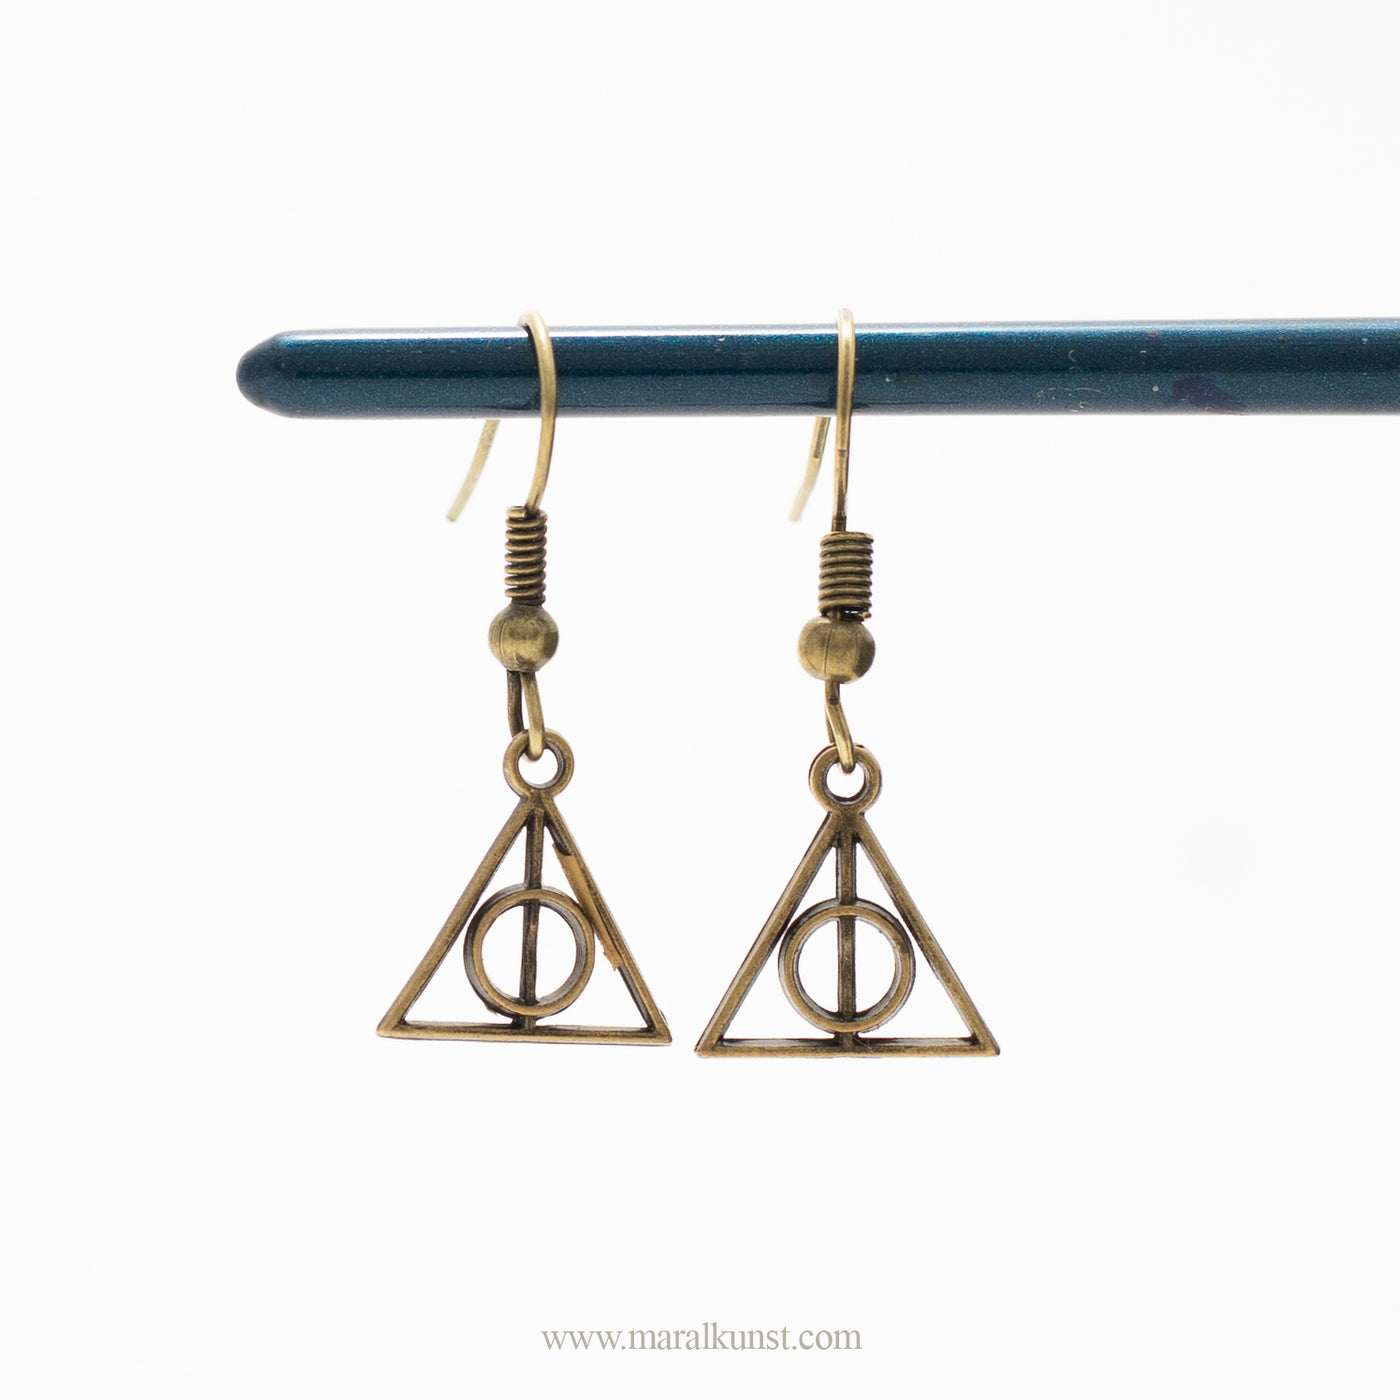 Harry Potter's Deathly Hallows earrings